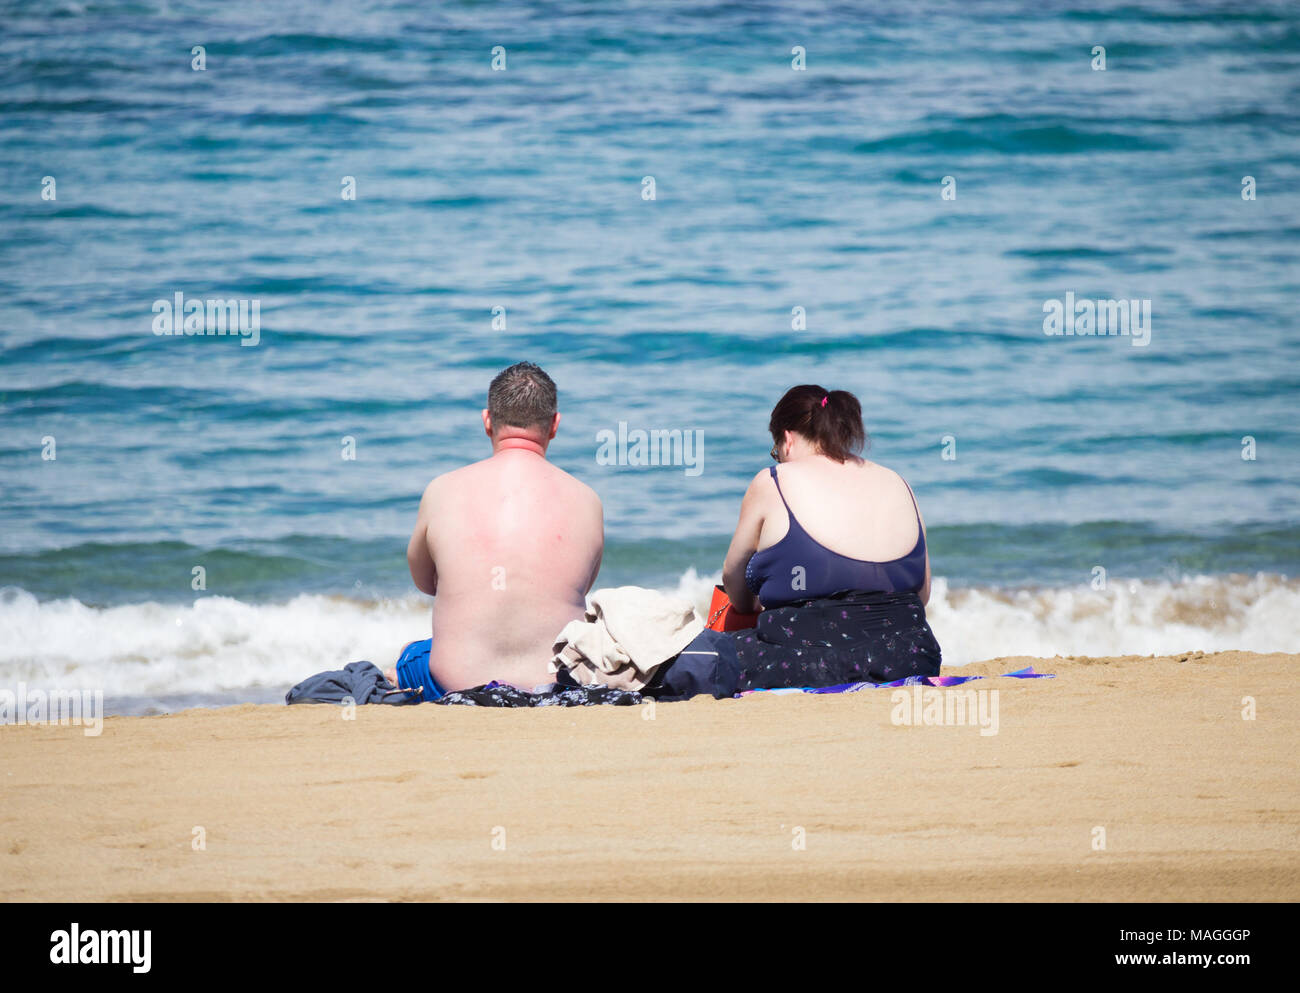 Brits abroad: couple sunbathing on beach in Spain Stock Photo